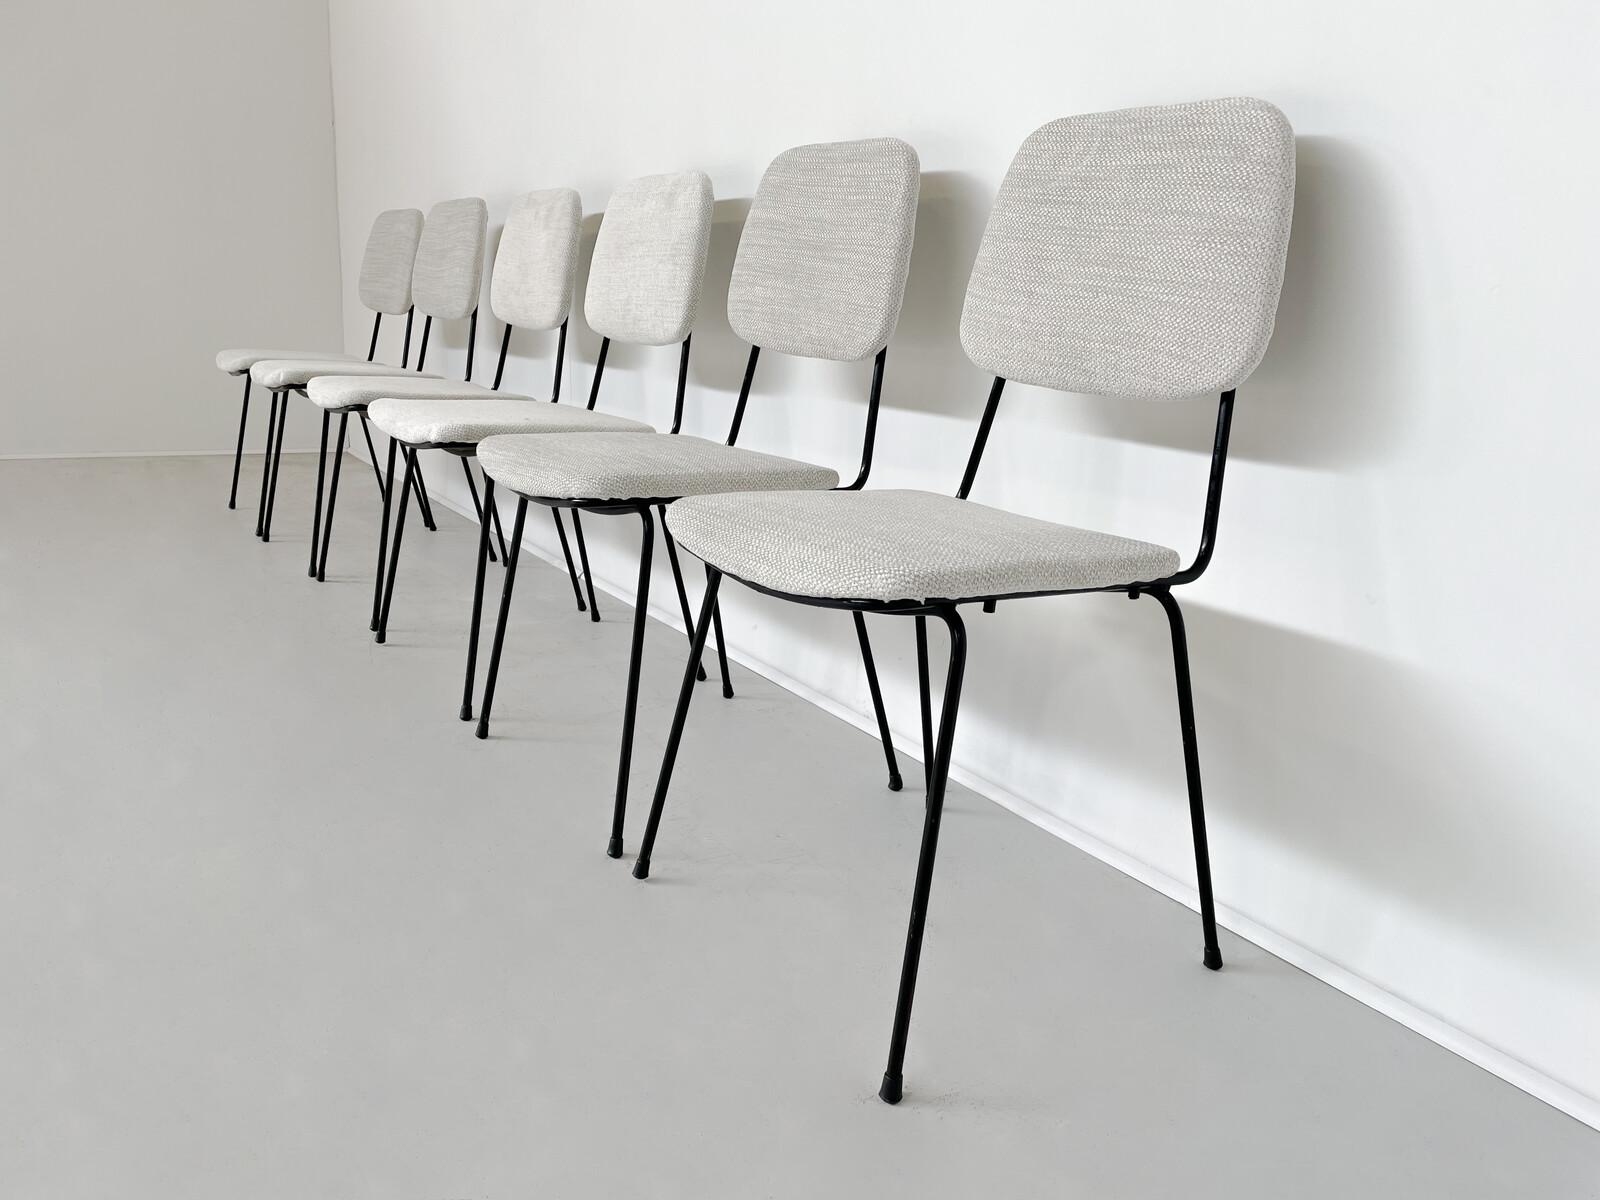 Milieu du XXe siècle The Modernity Set of 6 Chairs, Italie, 1960s - New Upholstery en vente